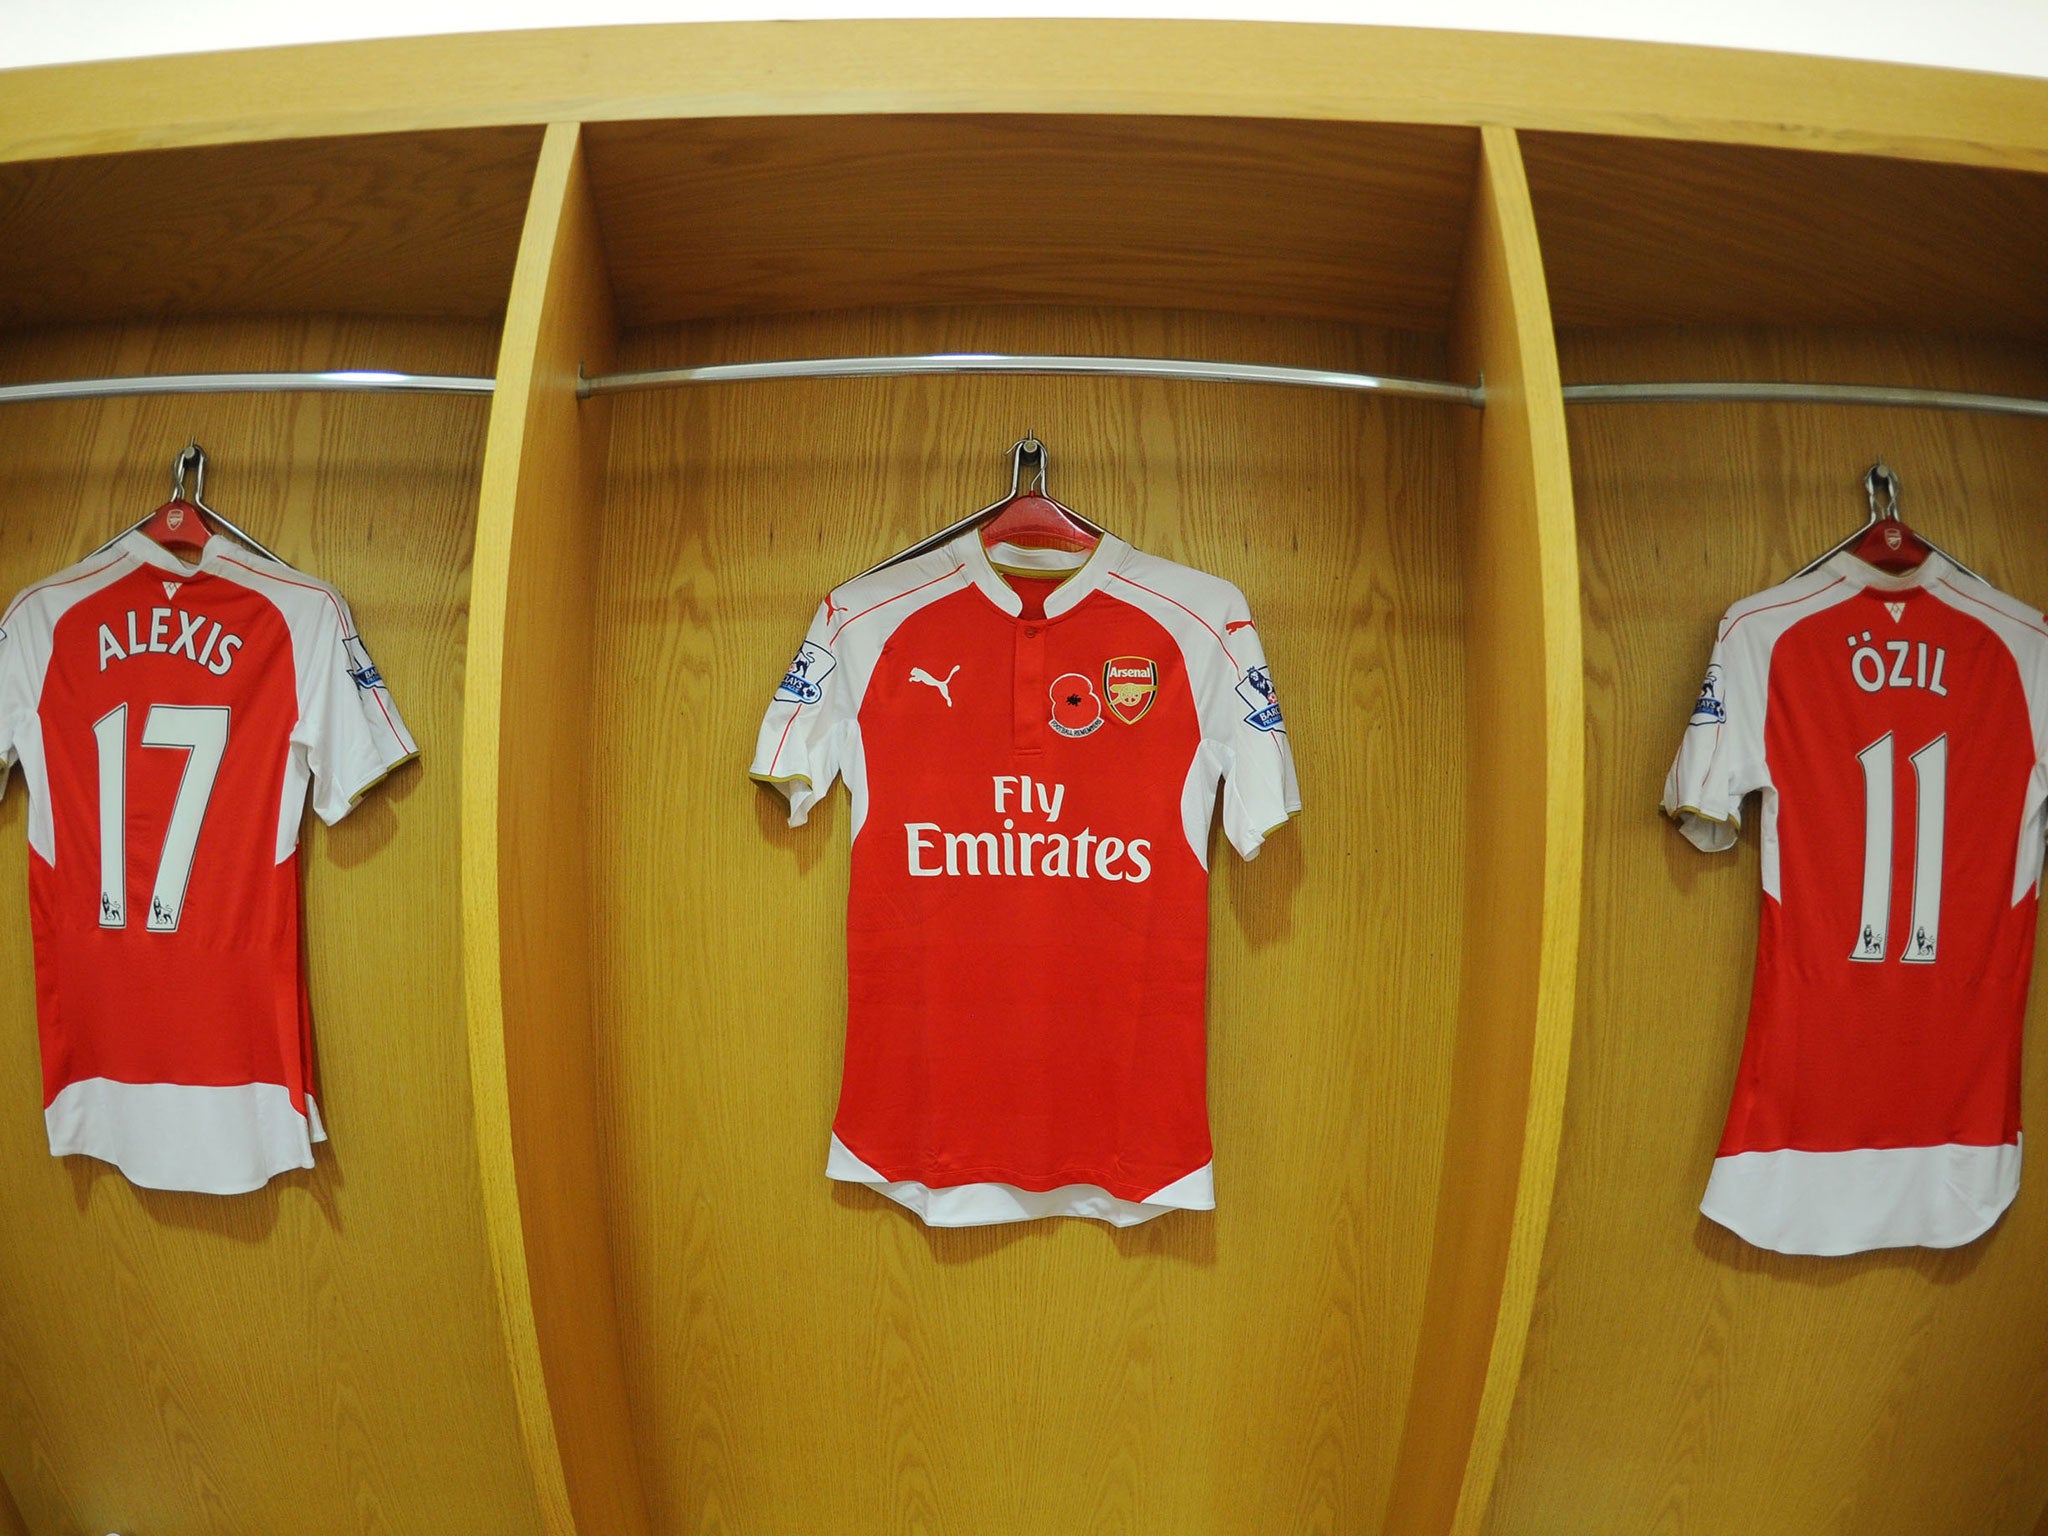 The shirts of Alexis Sanchez and Mesut Ozil